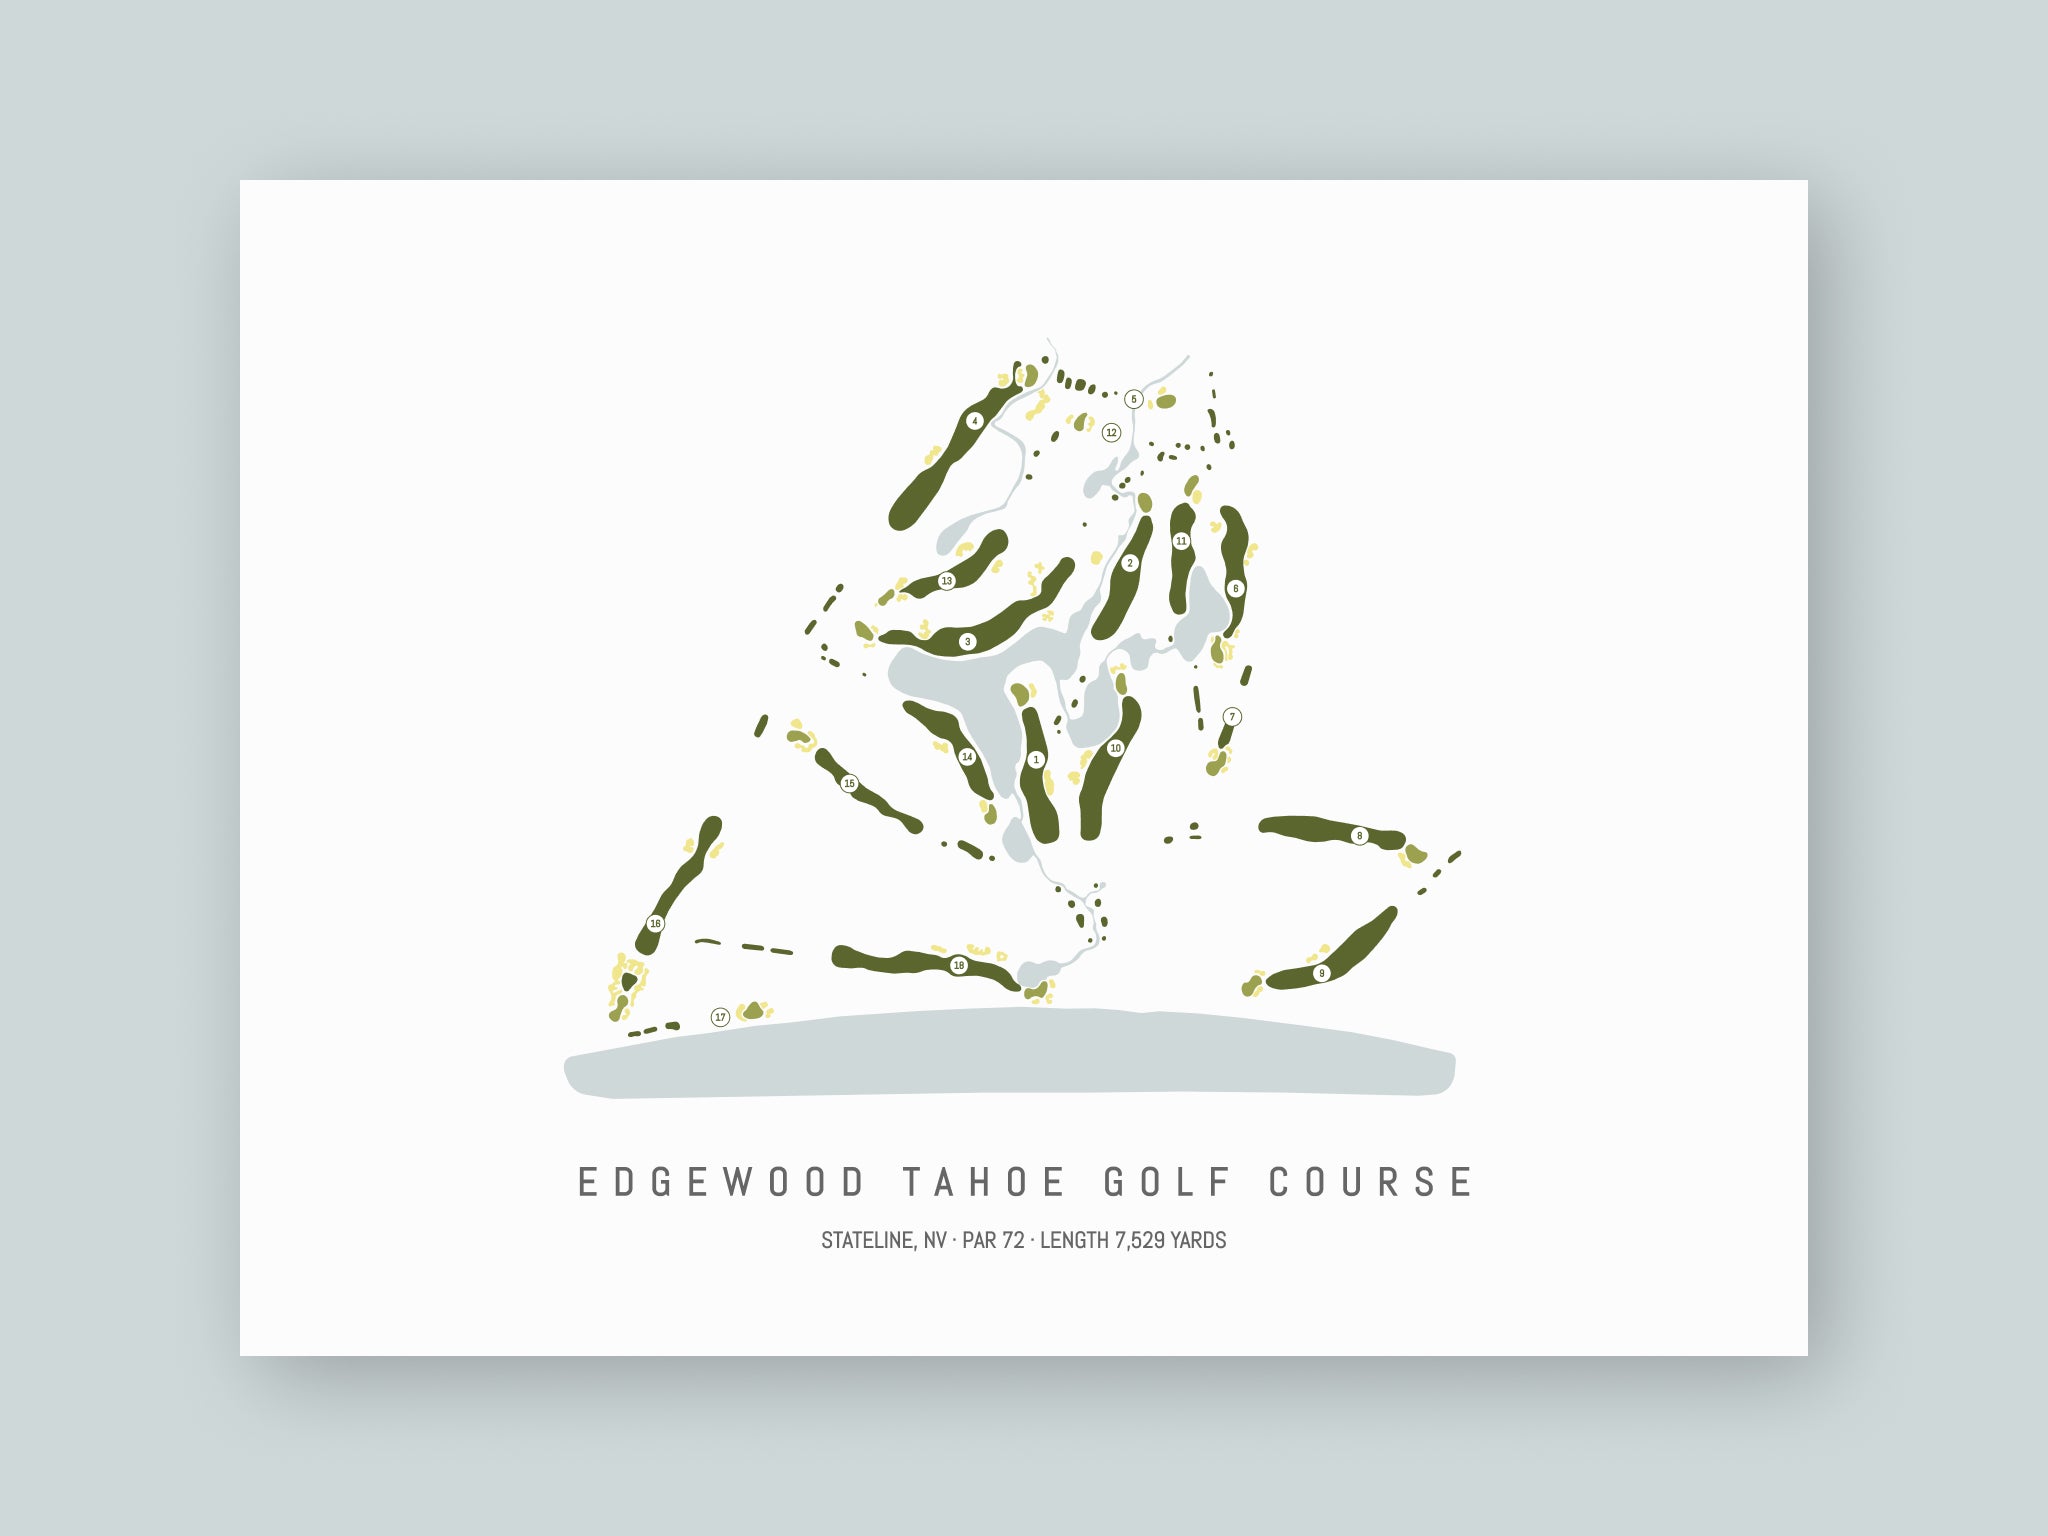 Edgewood-Tahoe-Golf-Course-NV--Unframed-24x18-With-Hole-Numbers